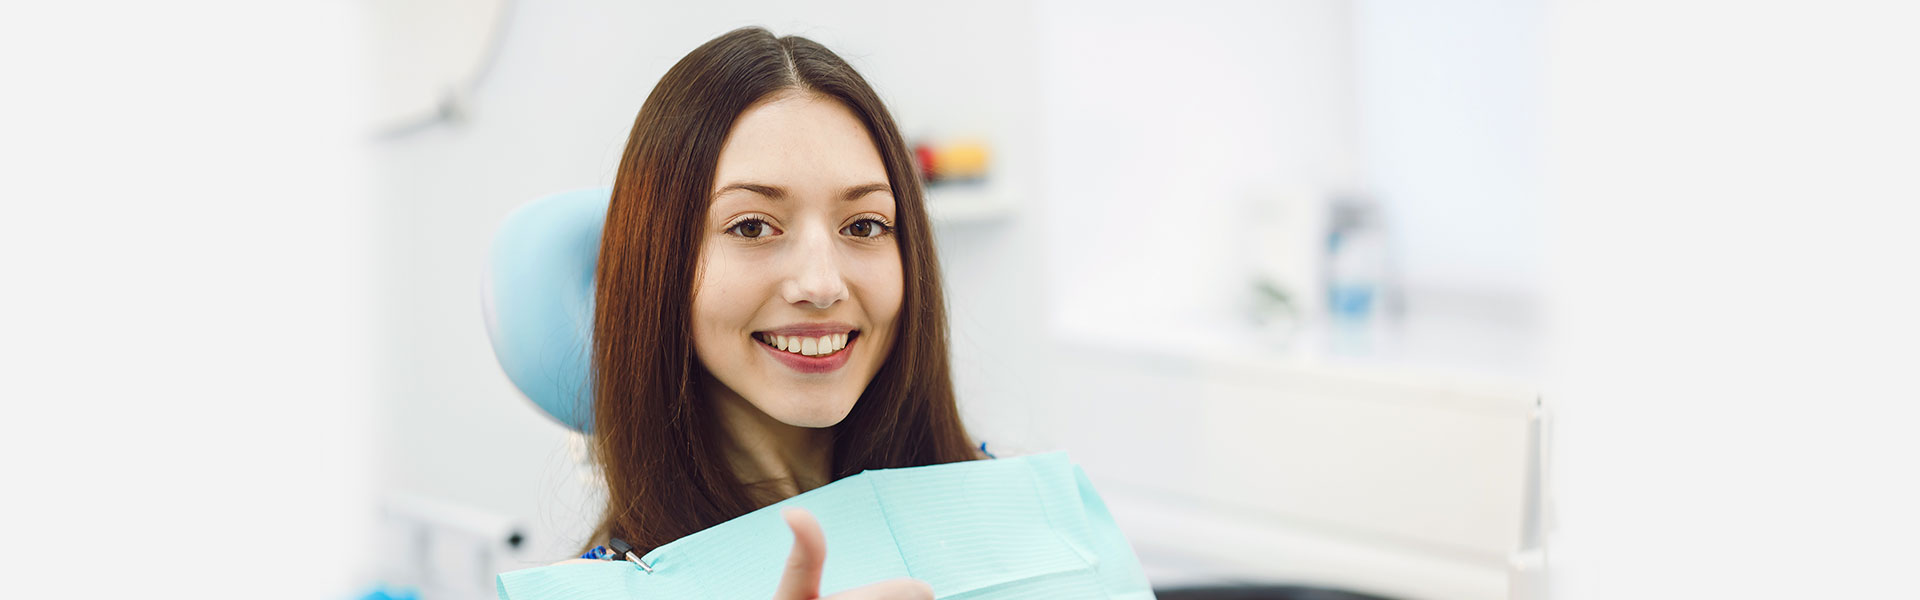 The Importance of Dental Exams & Cleanings: Pros and Cons